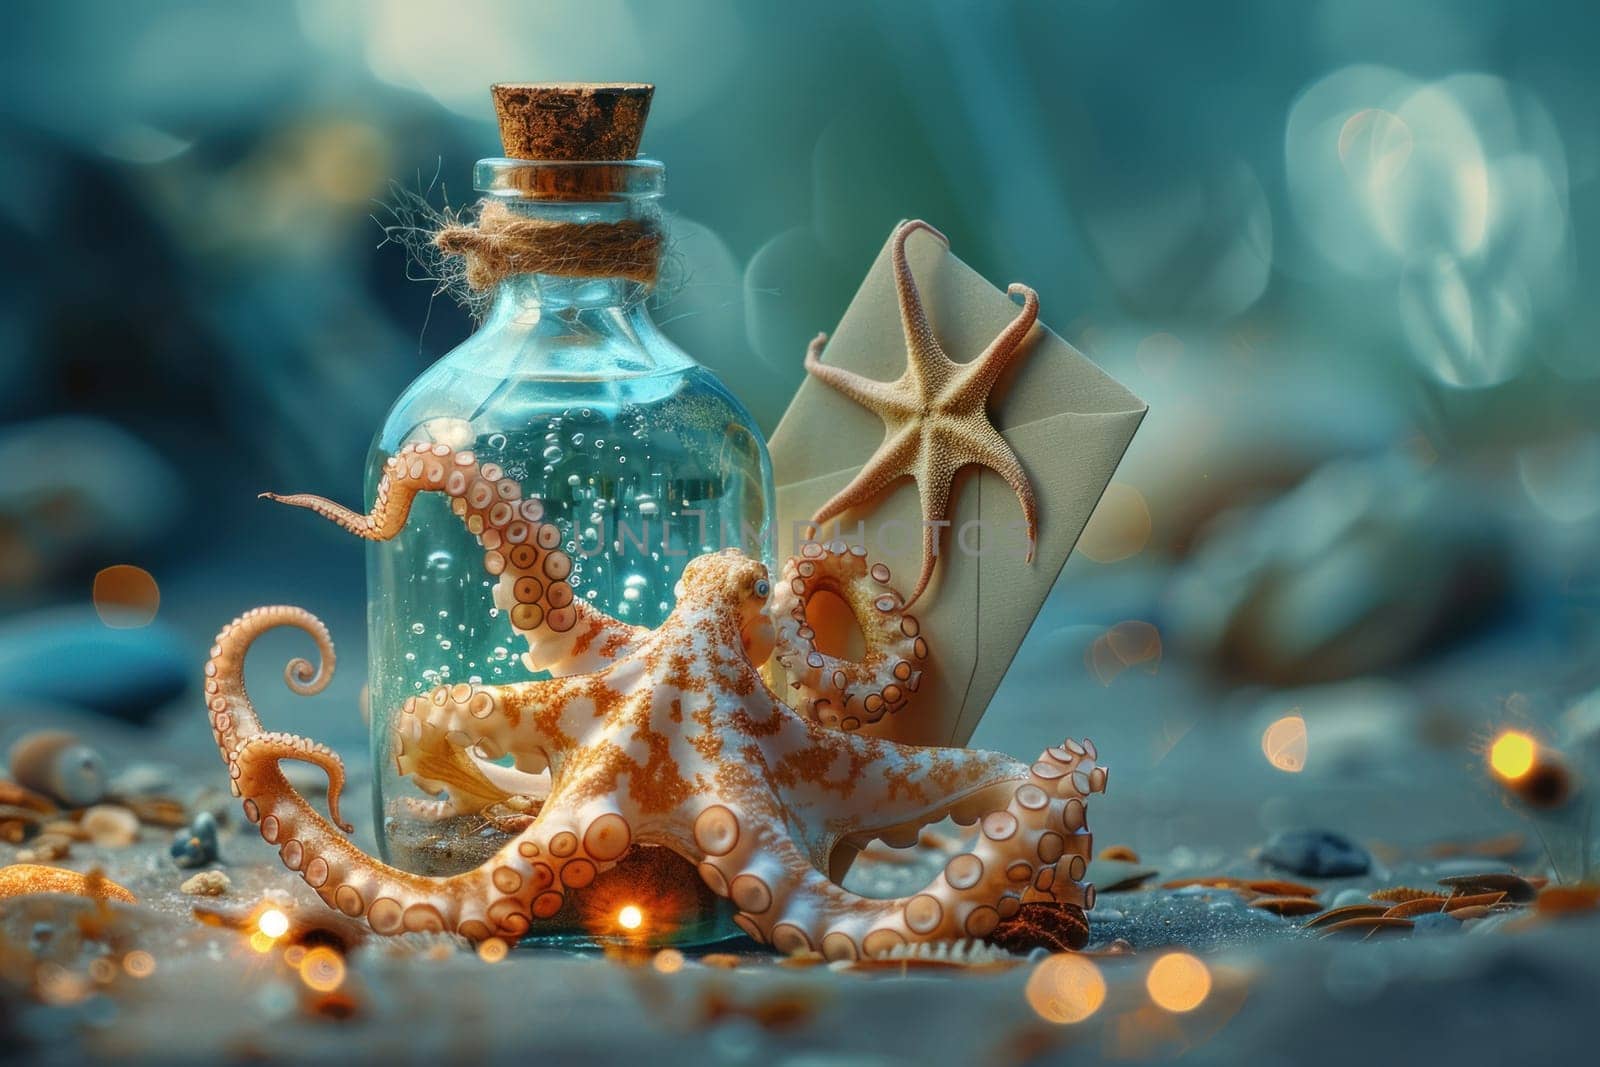 A bottle of liquid is next to a starfish and a letter. The scene is set on a beach with a blue sky in the background